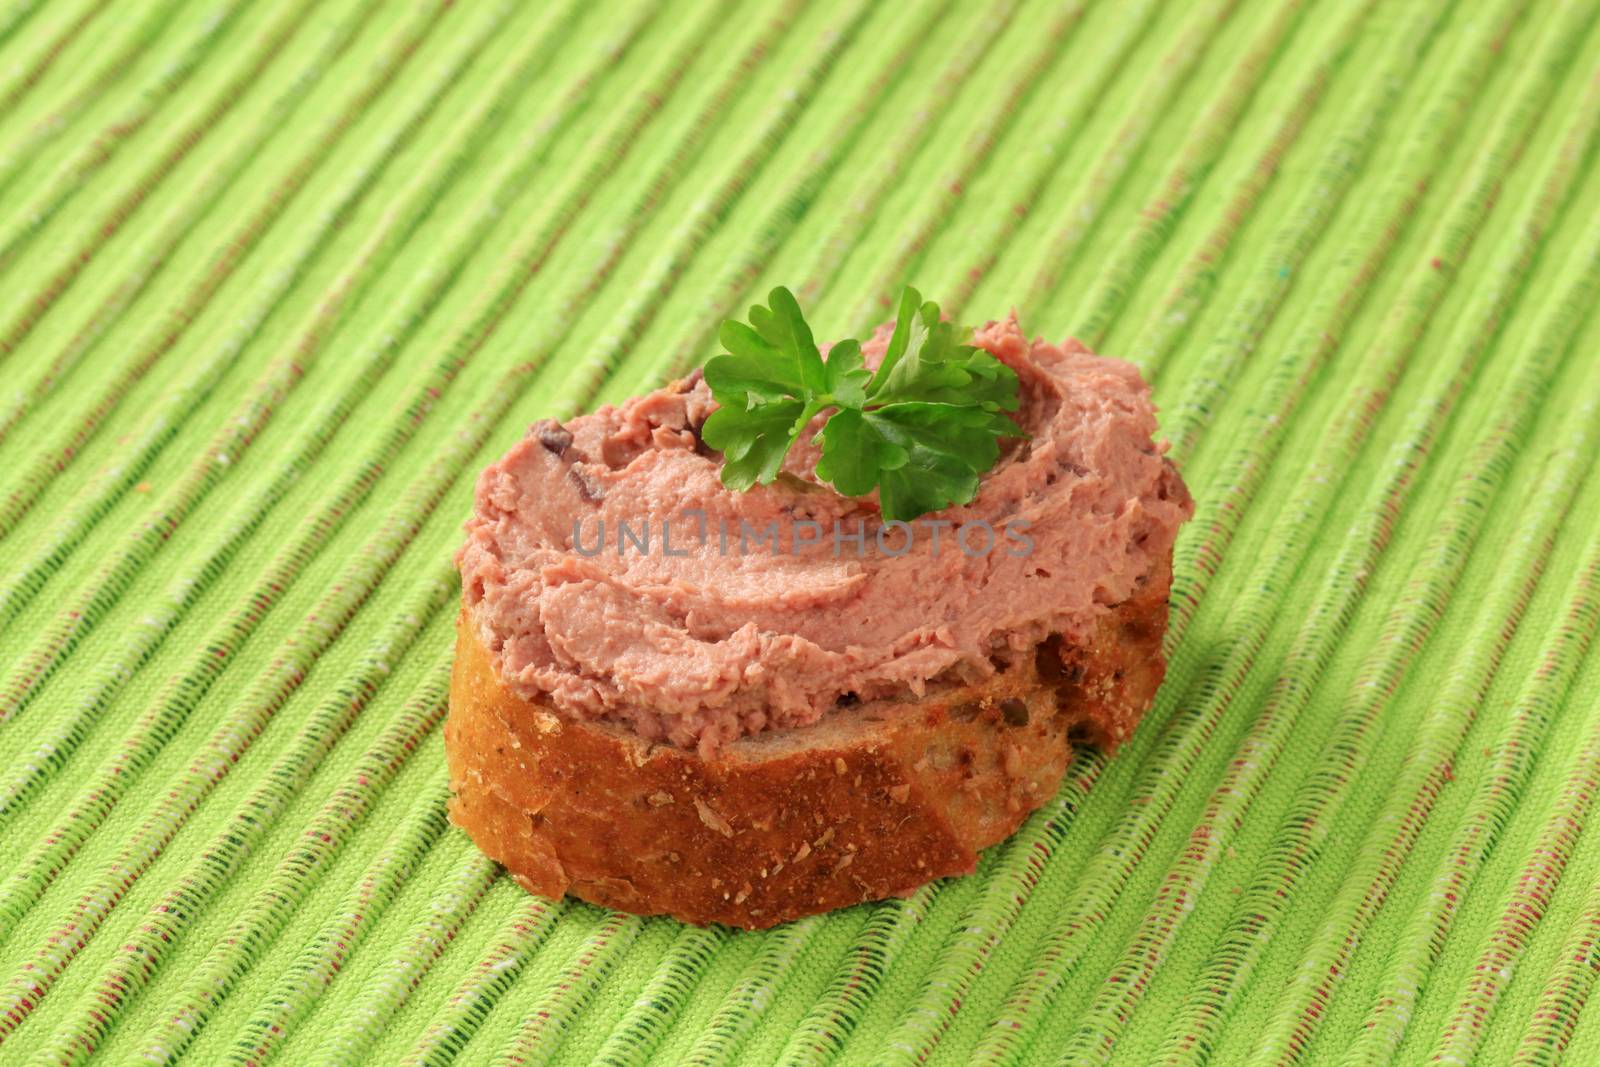 Pate canape by Digifoodstock